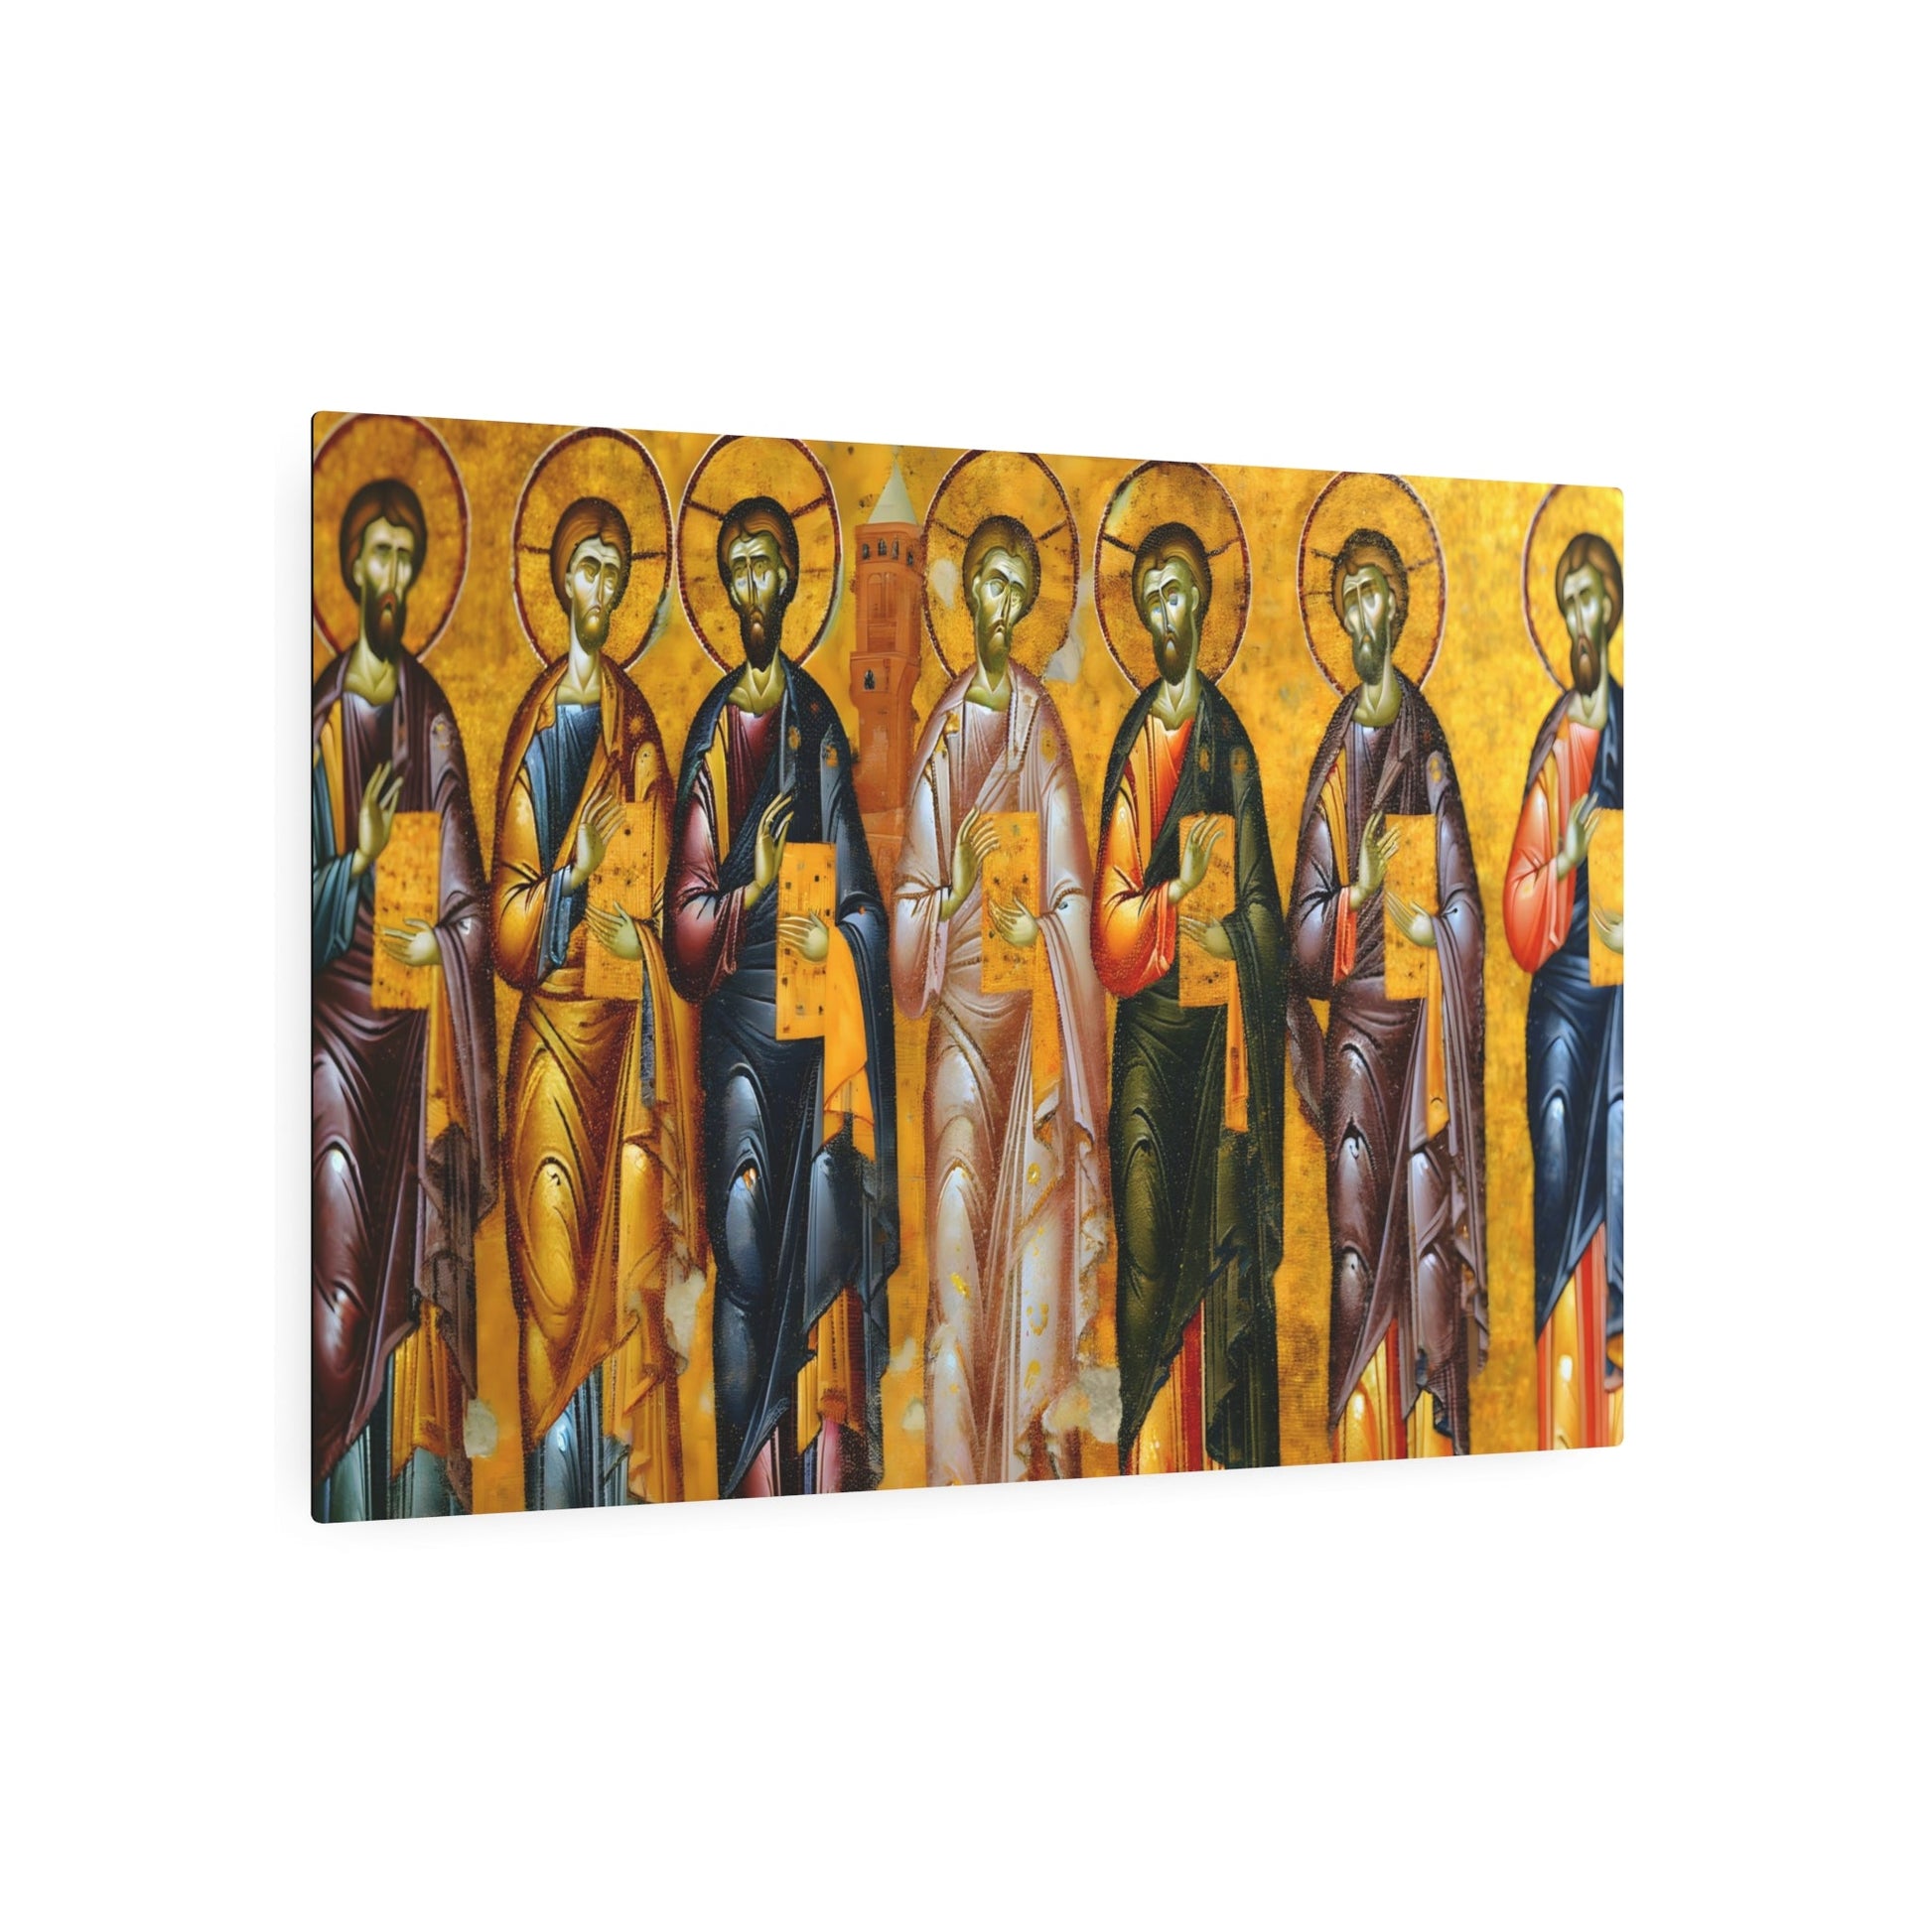 Metal Poster Art | "Traditional Byzantine Artwork with Religious Icons, Gold Accents, and Mosaics - Exquisite Non-Western & Global Styles Art Piece" - Metal Poster Art 36″ x 24″ (Horizontal) 0.12''